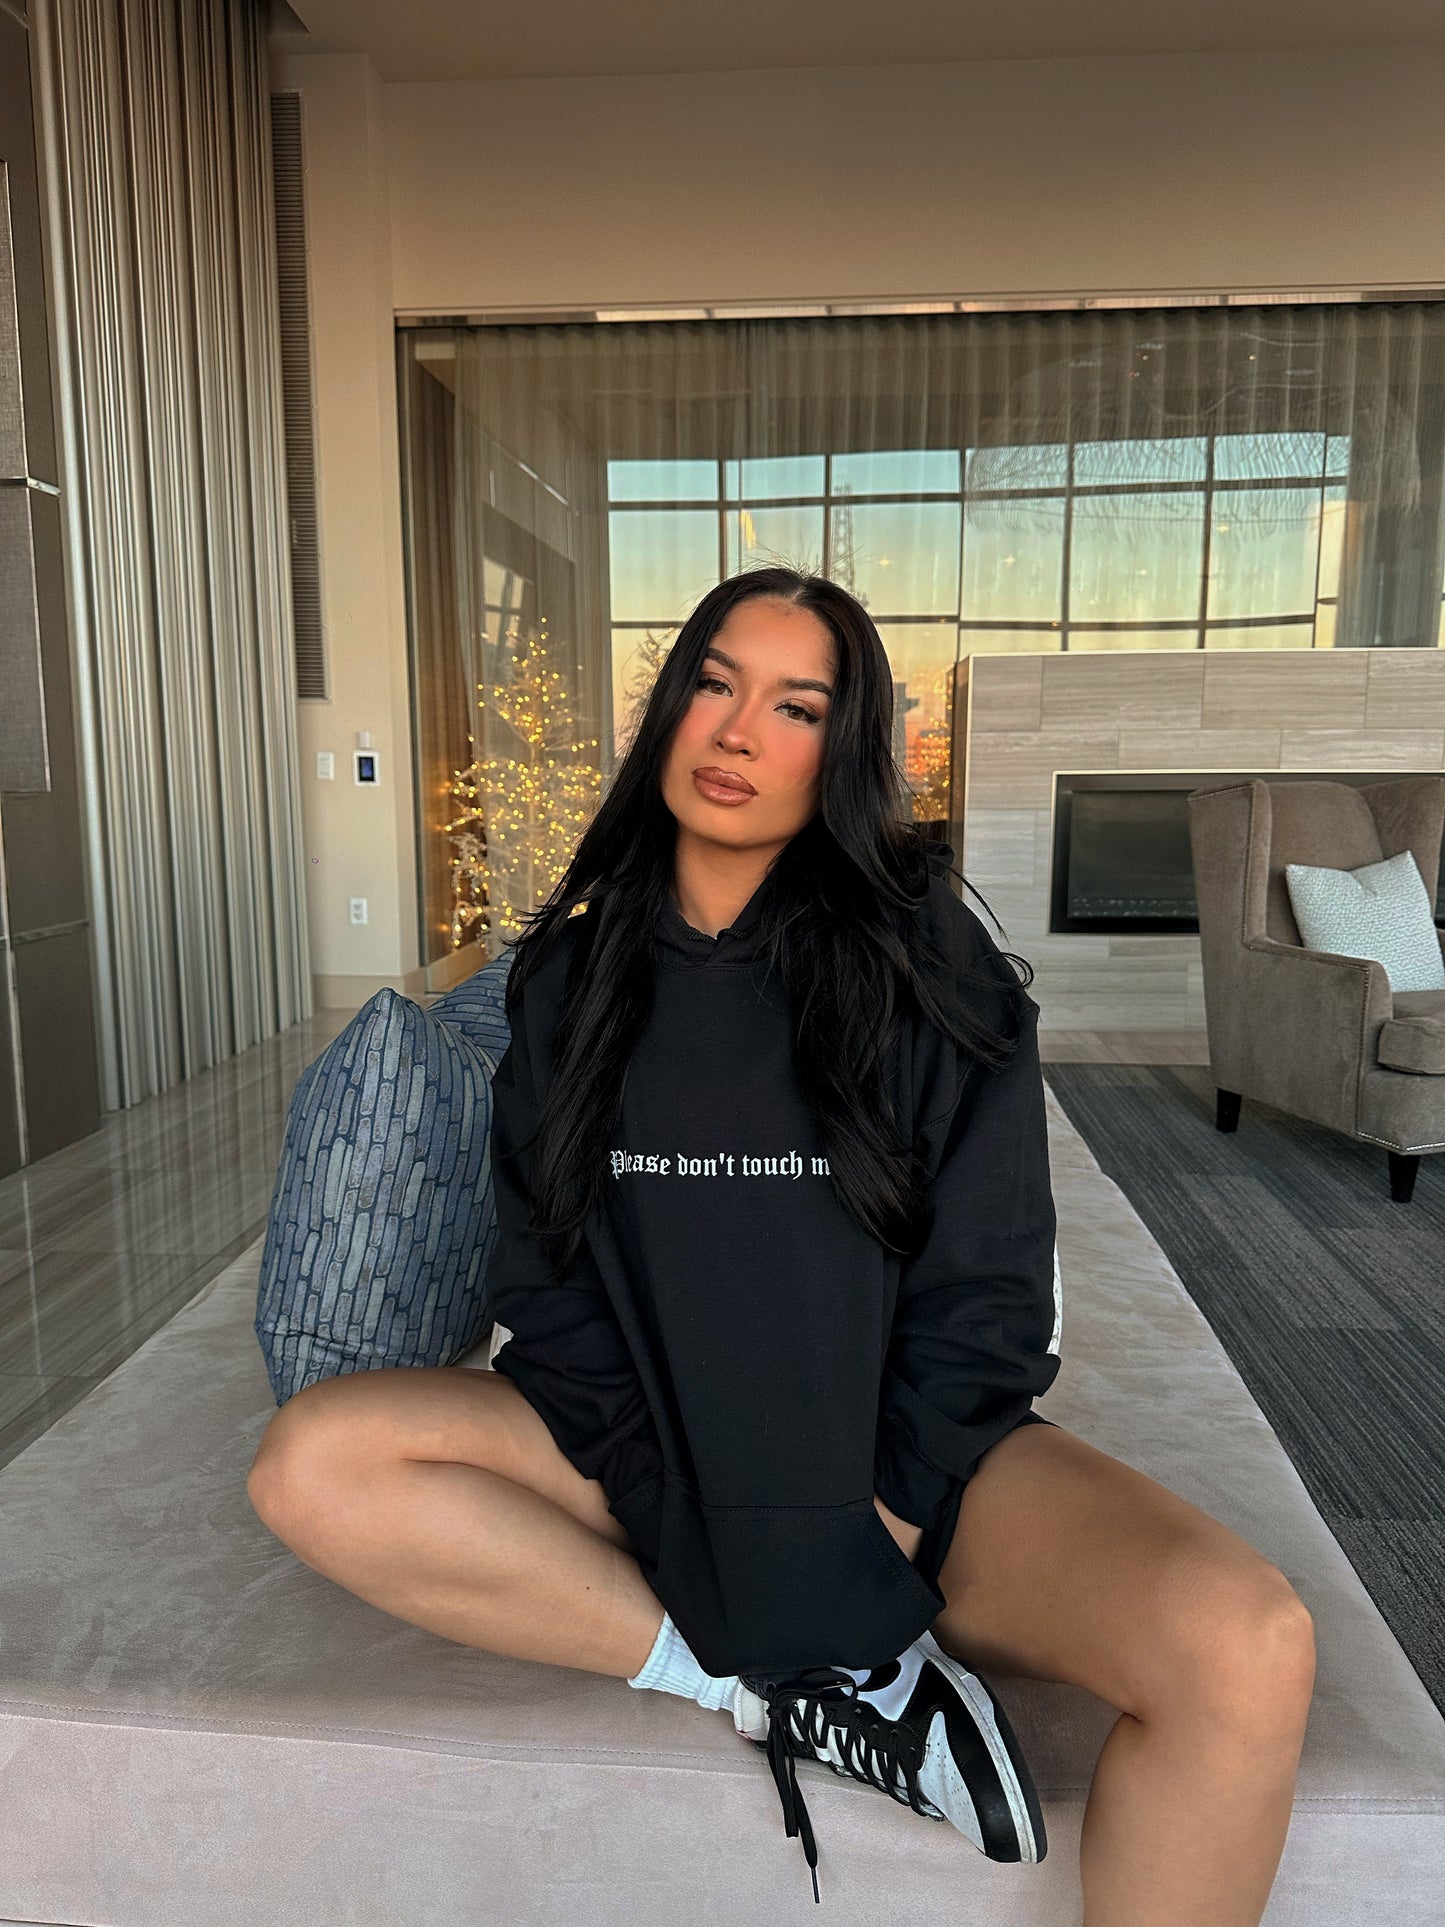 “Please don’t touch me” hoodie